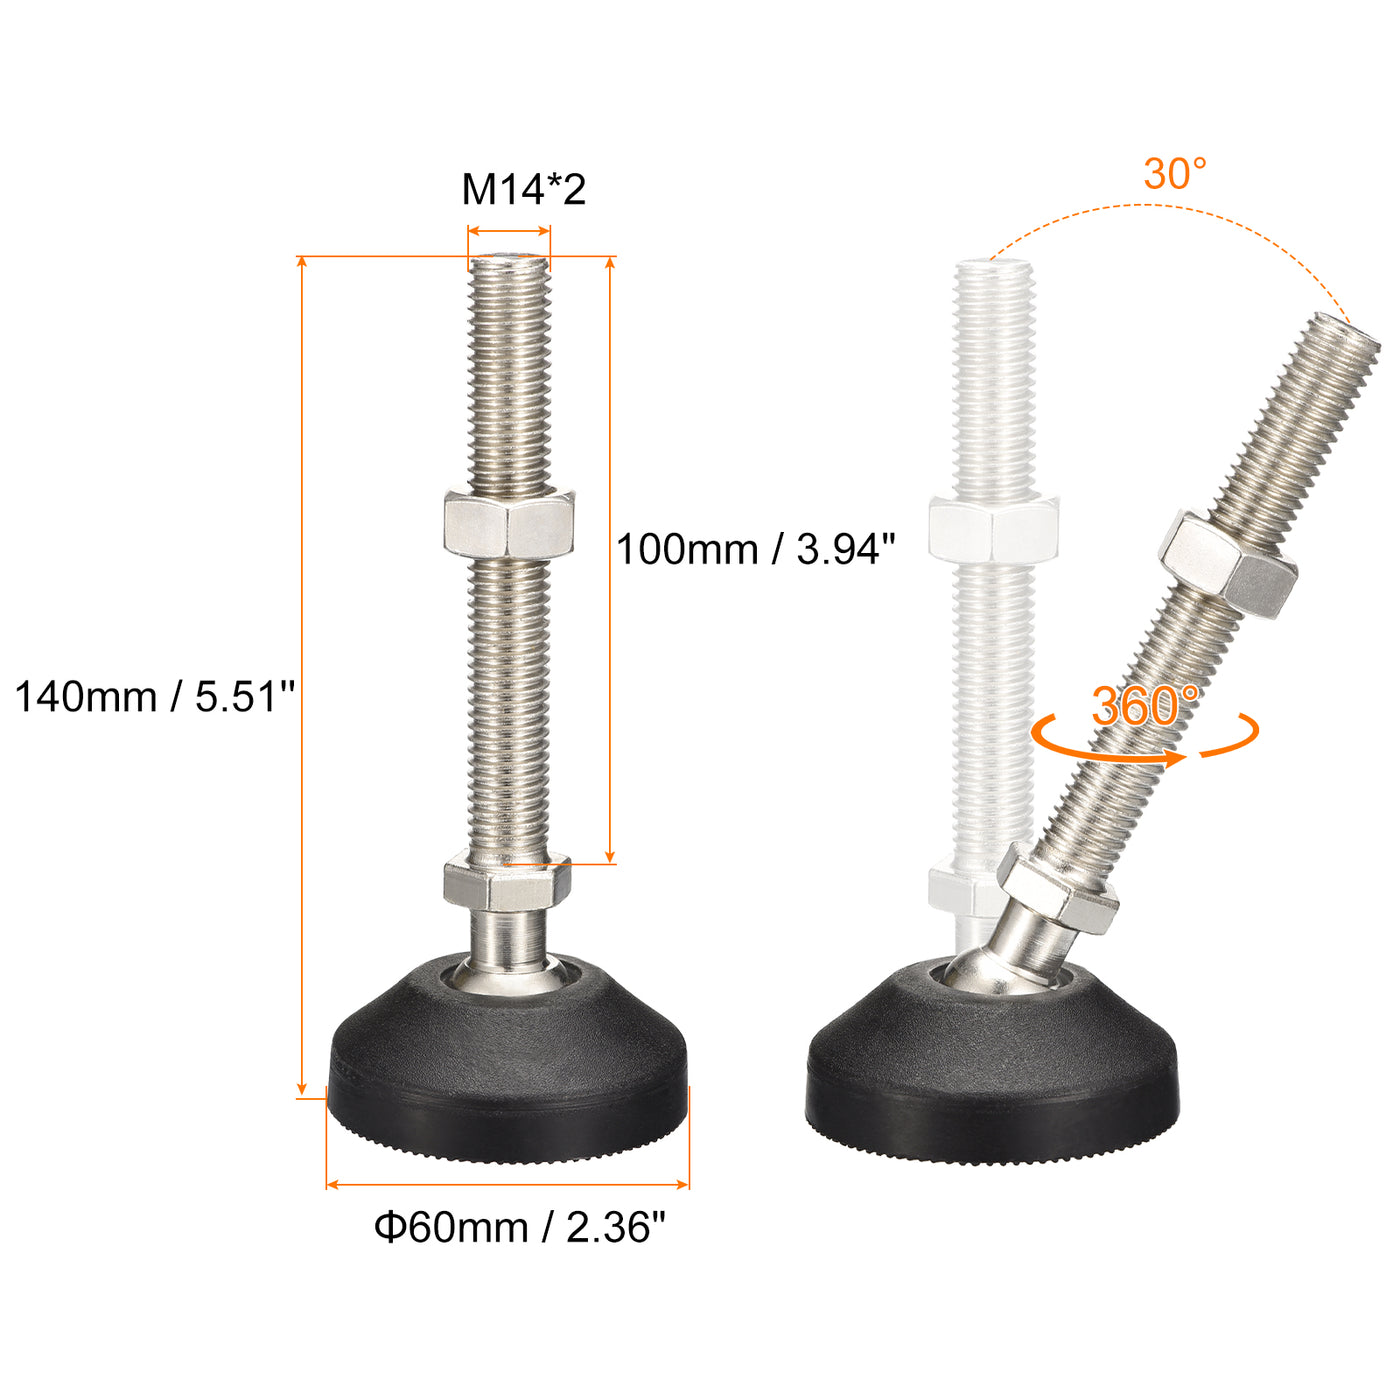 uxcell Uxcell Furniture Levelers, 1Pcs M14x100x60mm Nylon Universal Leveling Feet, Adjustable Swivel Table Feet for Furniture Workshop Machines Machinery Equipment